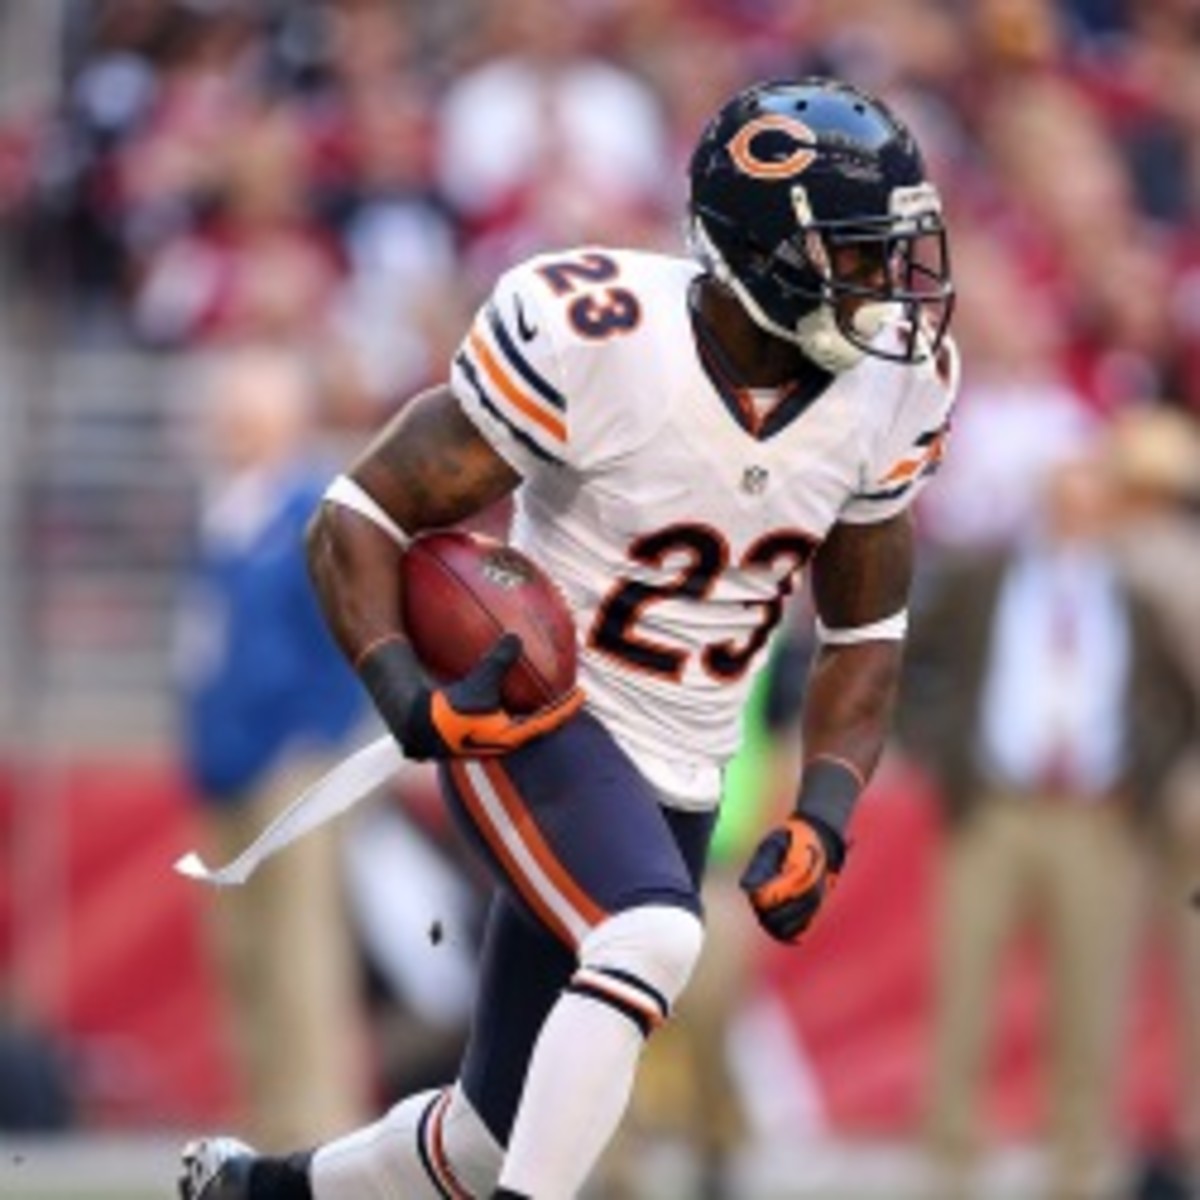 Bears wideout Devin Hester says he is considering retirement. (Christian Petersen/Getty Images)